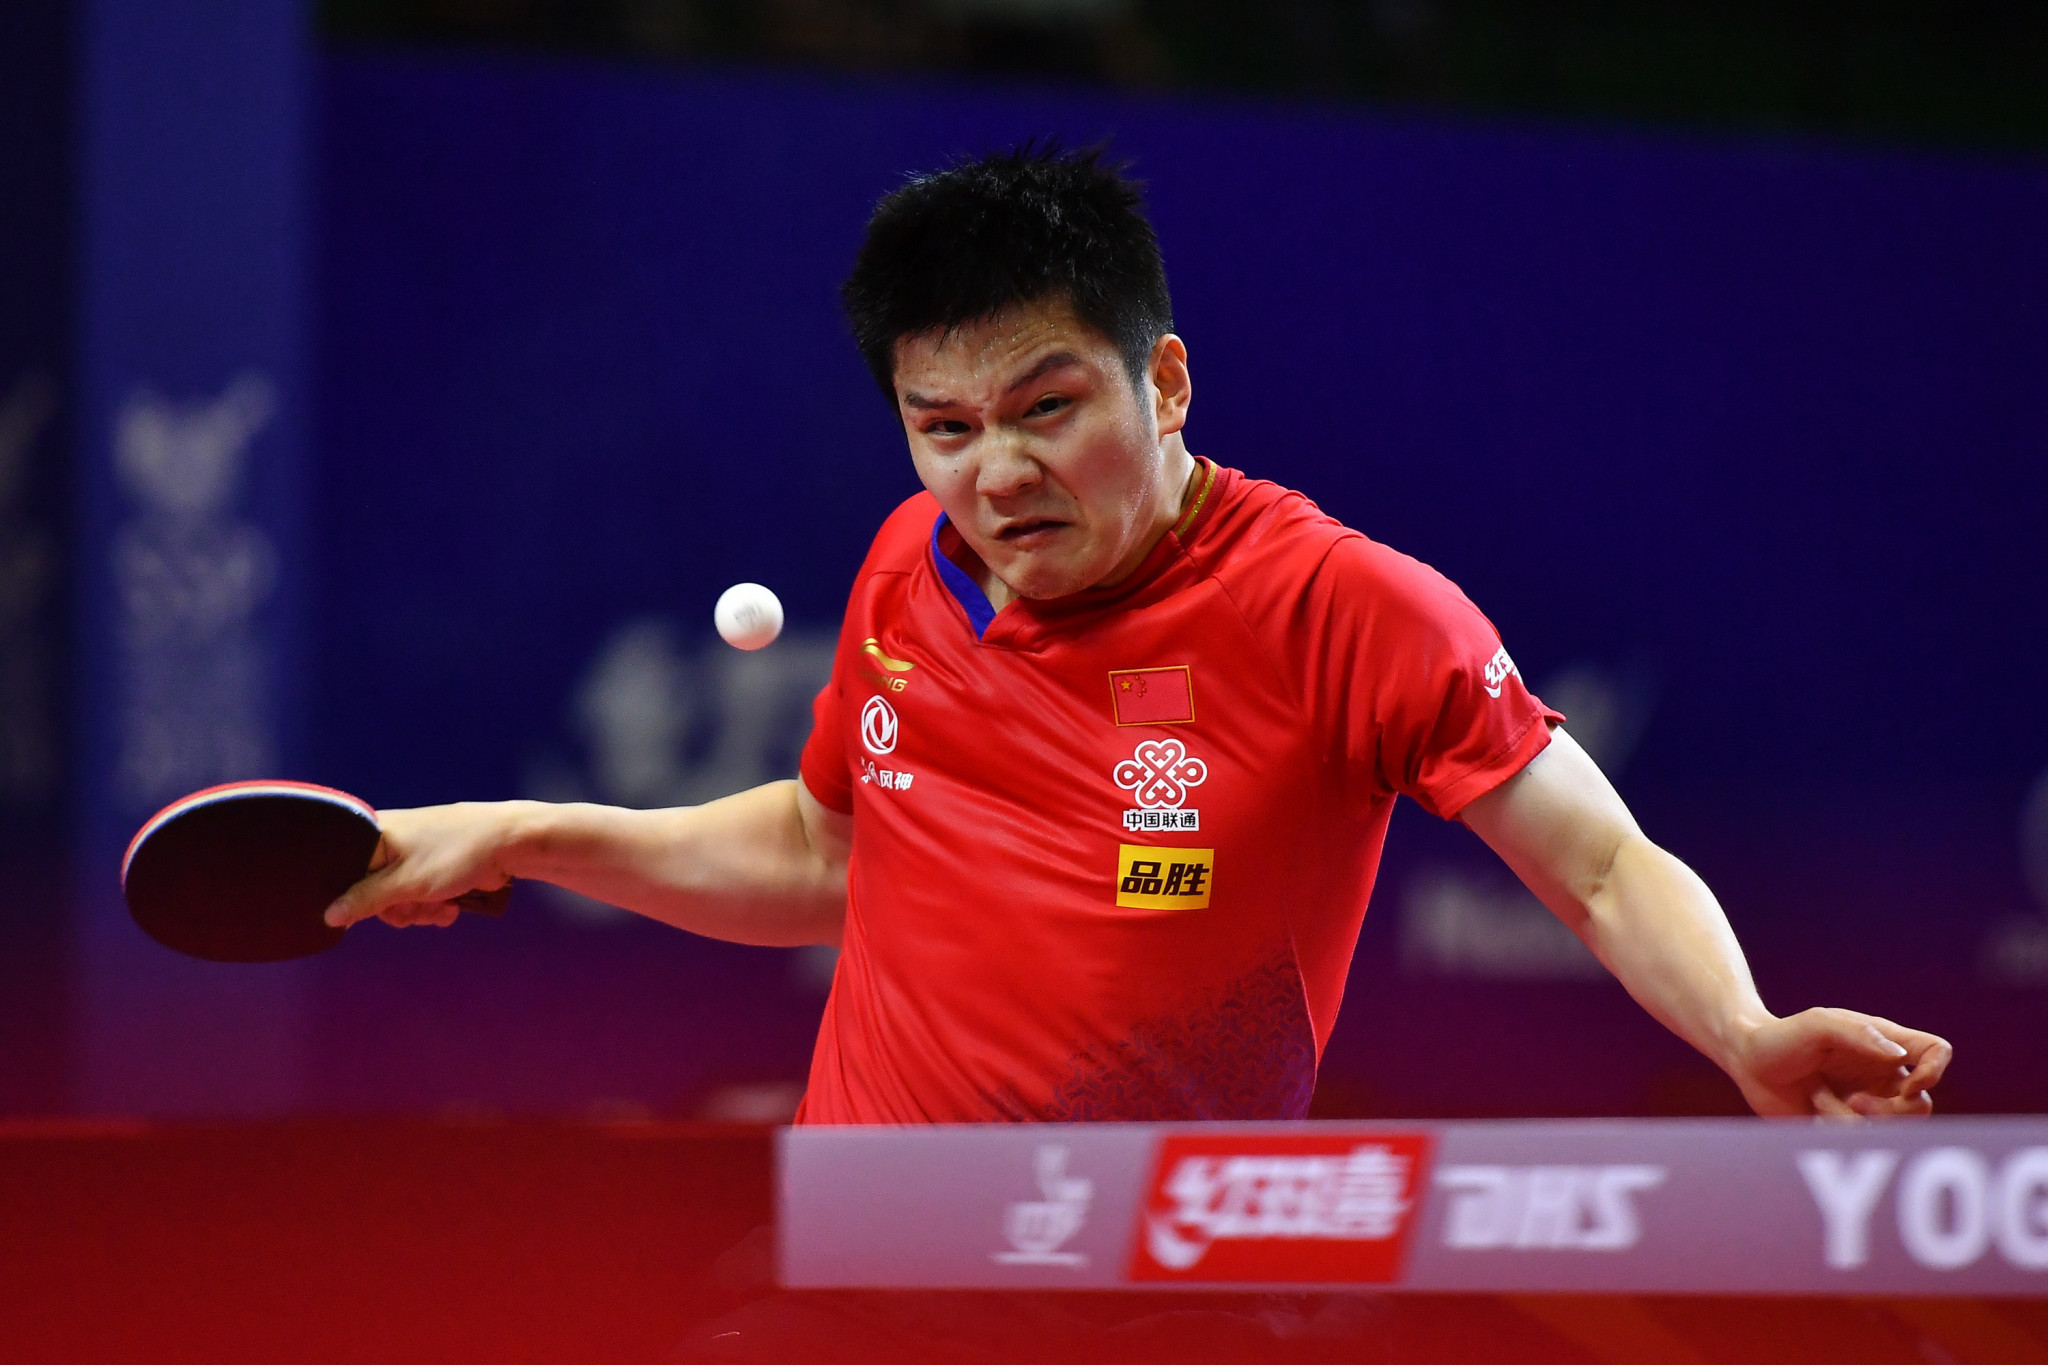 China's Fan Zhendong ended his long wait for a World Tour title with victory at the German Open in Bremen ©Getty Images